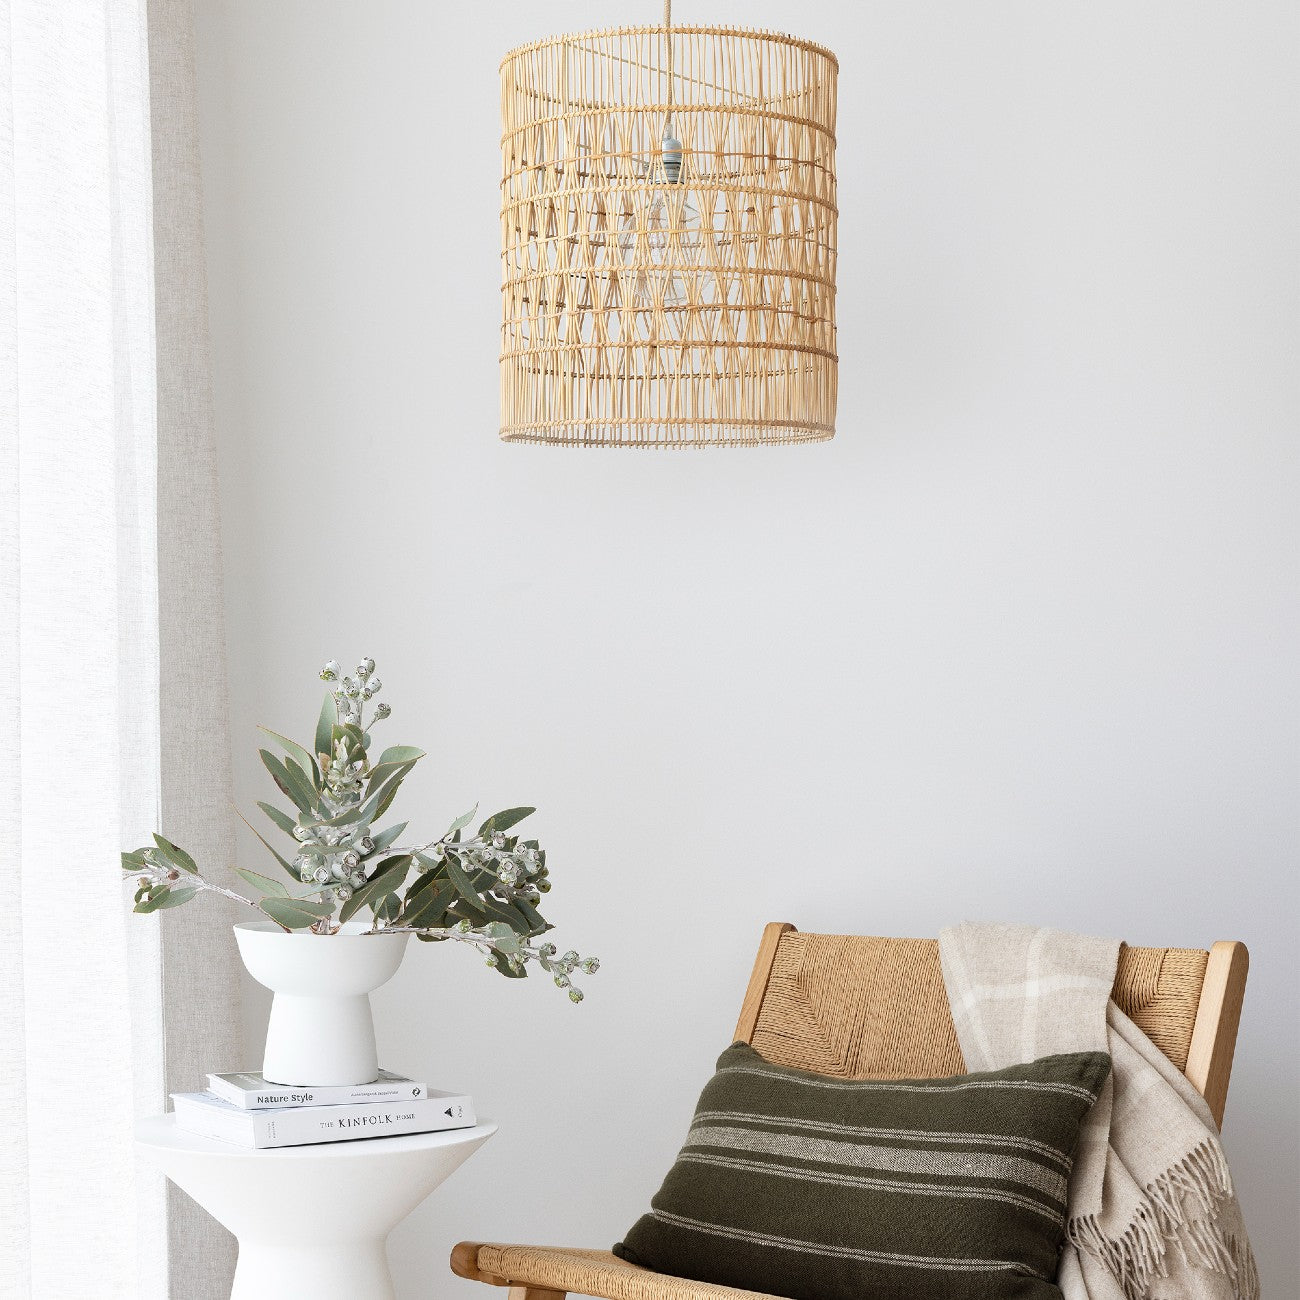 rattan pendant light shade. cylindrical light shade hanging above an occasional chair with an olive green cushion, and a vase of gum leaves.